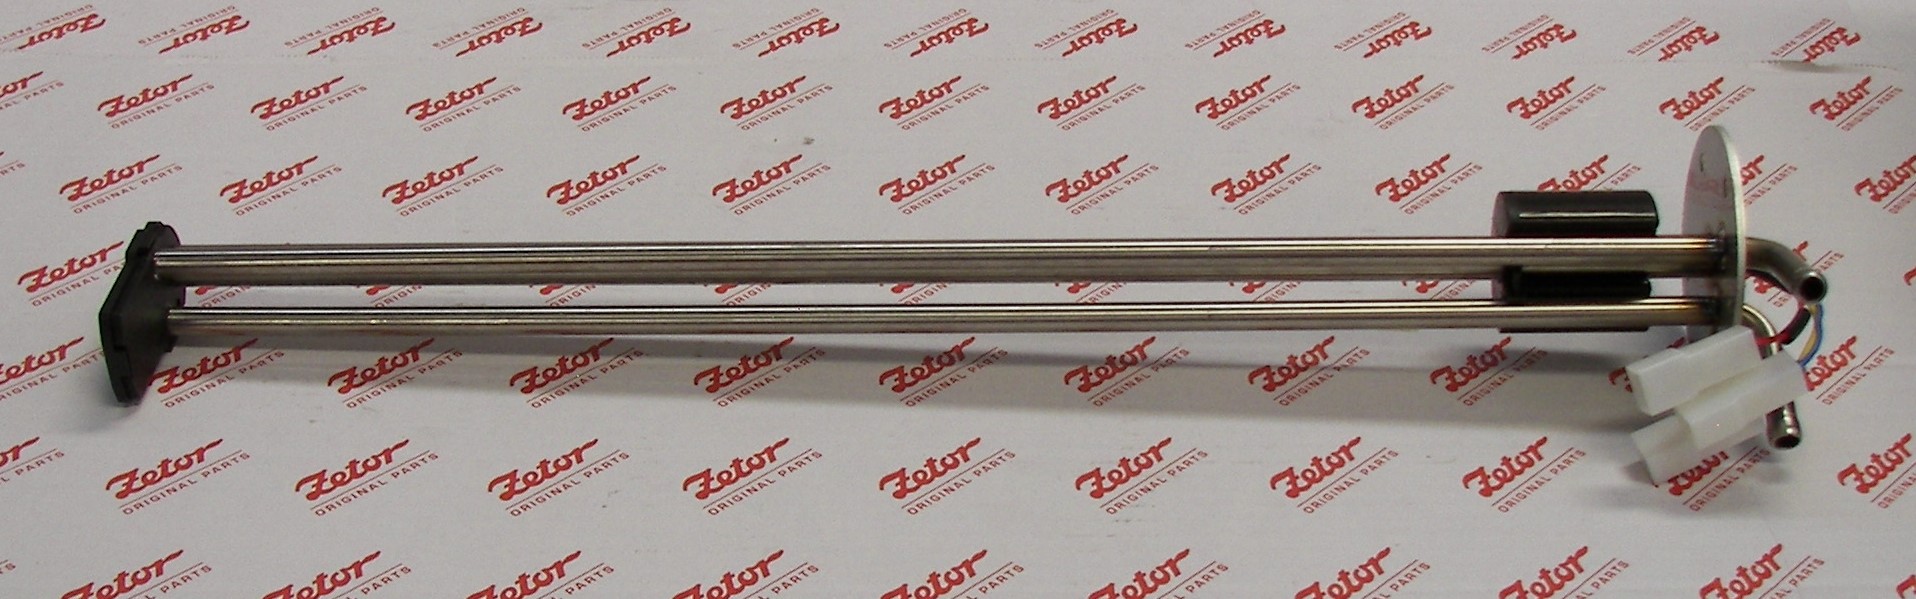 FLOAT, 20-1/2 IN. LONG, WITH OVAL SEALED CONNECTOR, INCLUDES GASKET